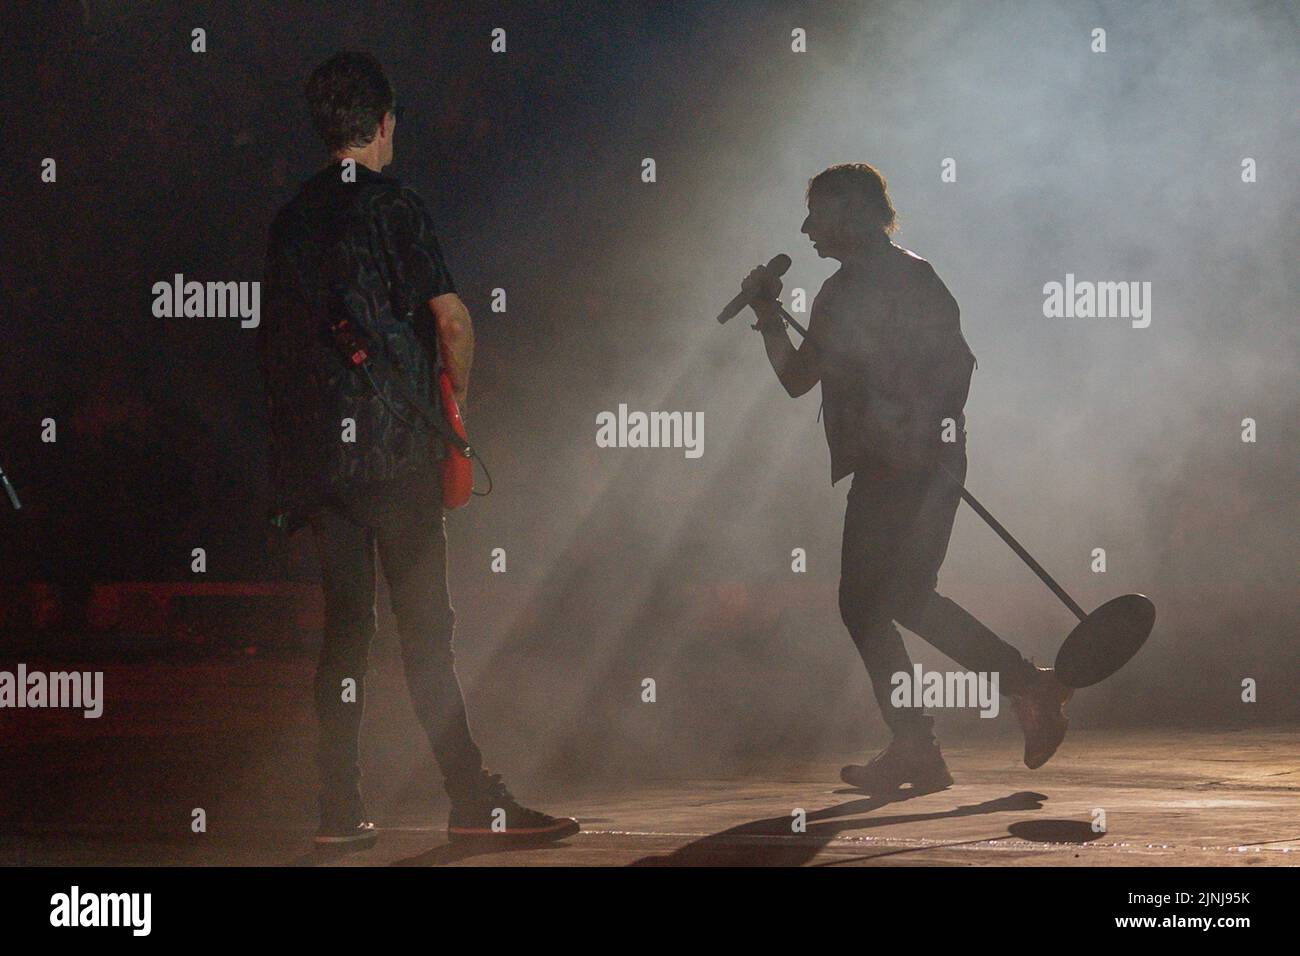 Siracusa, Italy. 11th Aug, 2022. Gianna Nannini performing on stage during Gianna Nannini - Estate 2022, Italian singer Music Concert in Siracusa, Italy, August 11 2022 Credit: Independent Photo Agency/Alamy Live News Stock Photo